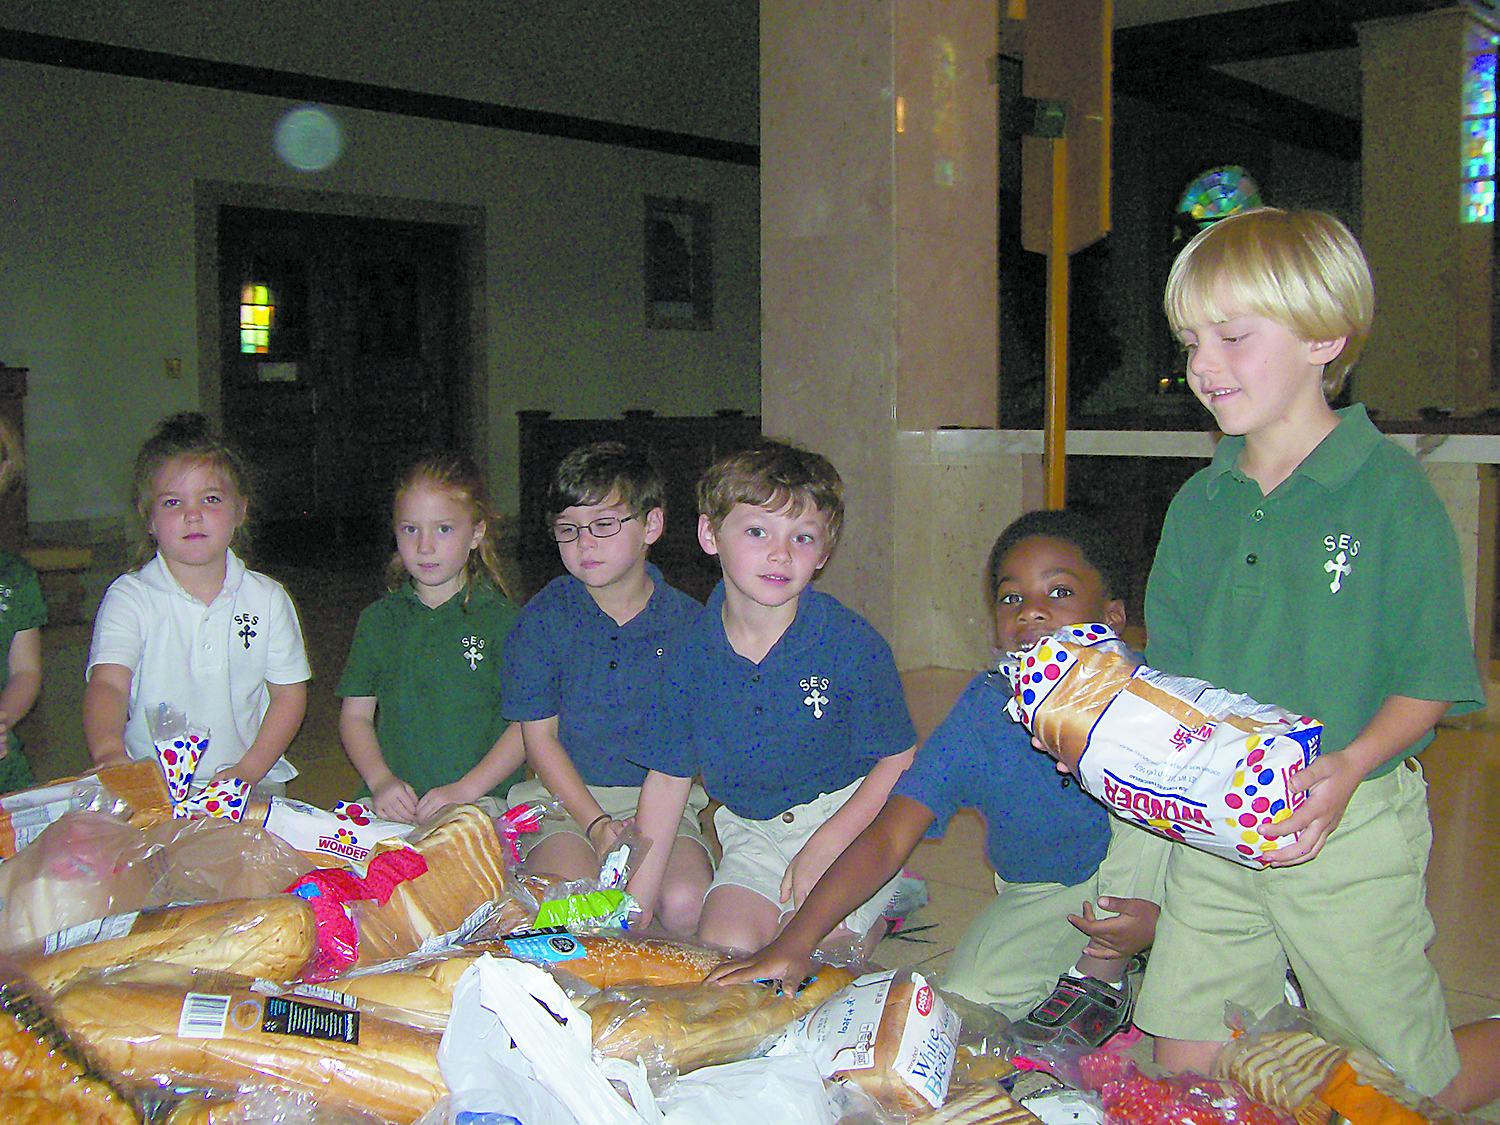 CLARKSDALE – Students at St. Elizabeth School celebrated thier patron saint’s feast day by donating bread to local food banks. St. Elizabeth of Hungary was known for her generosity to the poor. 